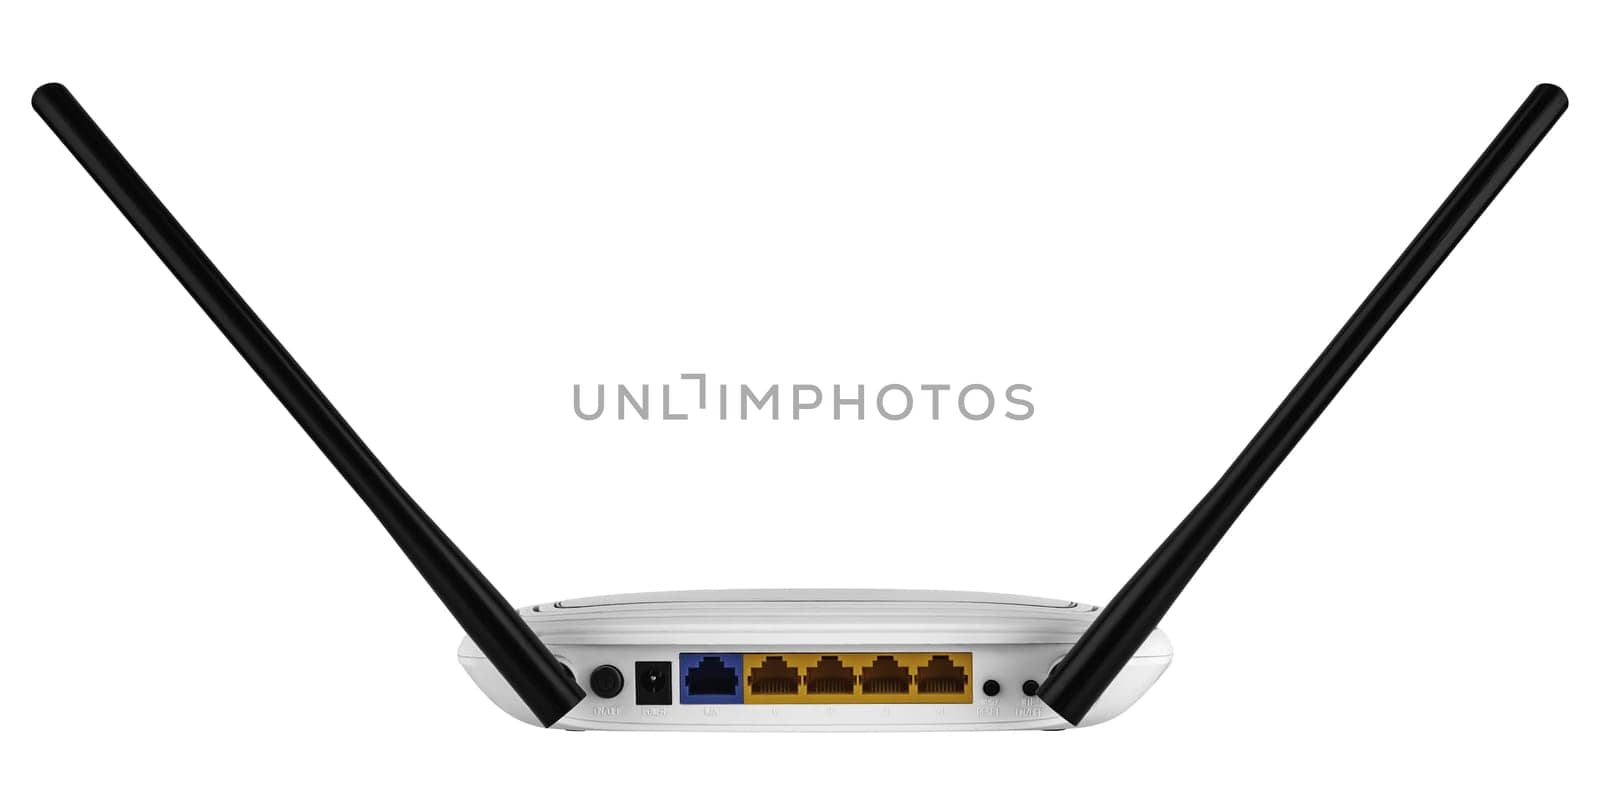 Wi-Fi network router, on a white background in isolation by A_A